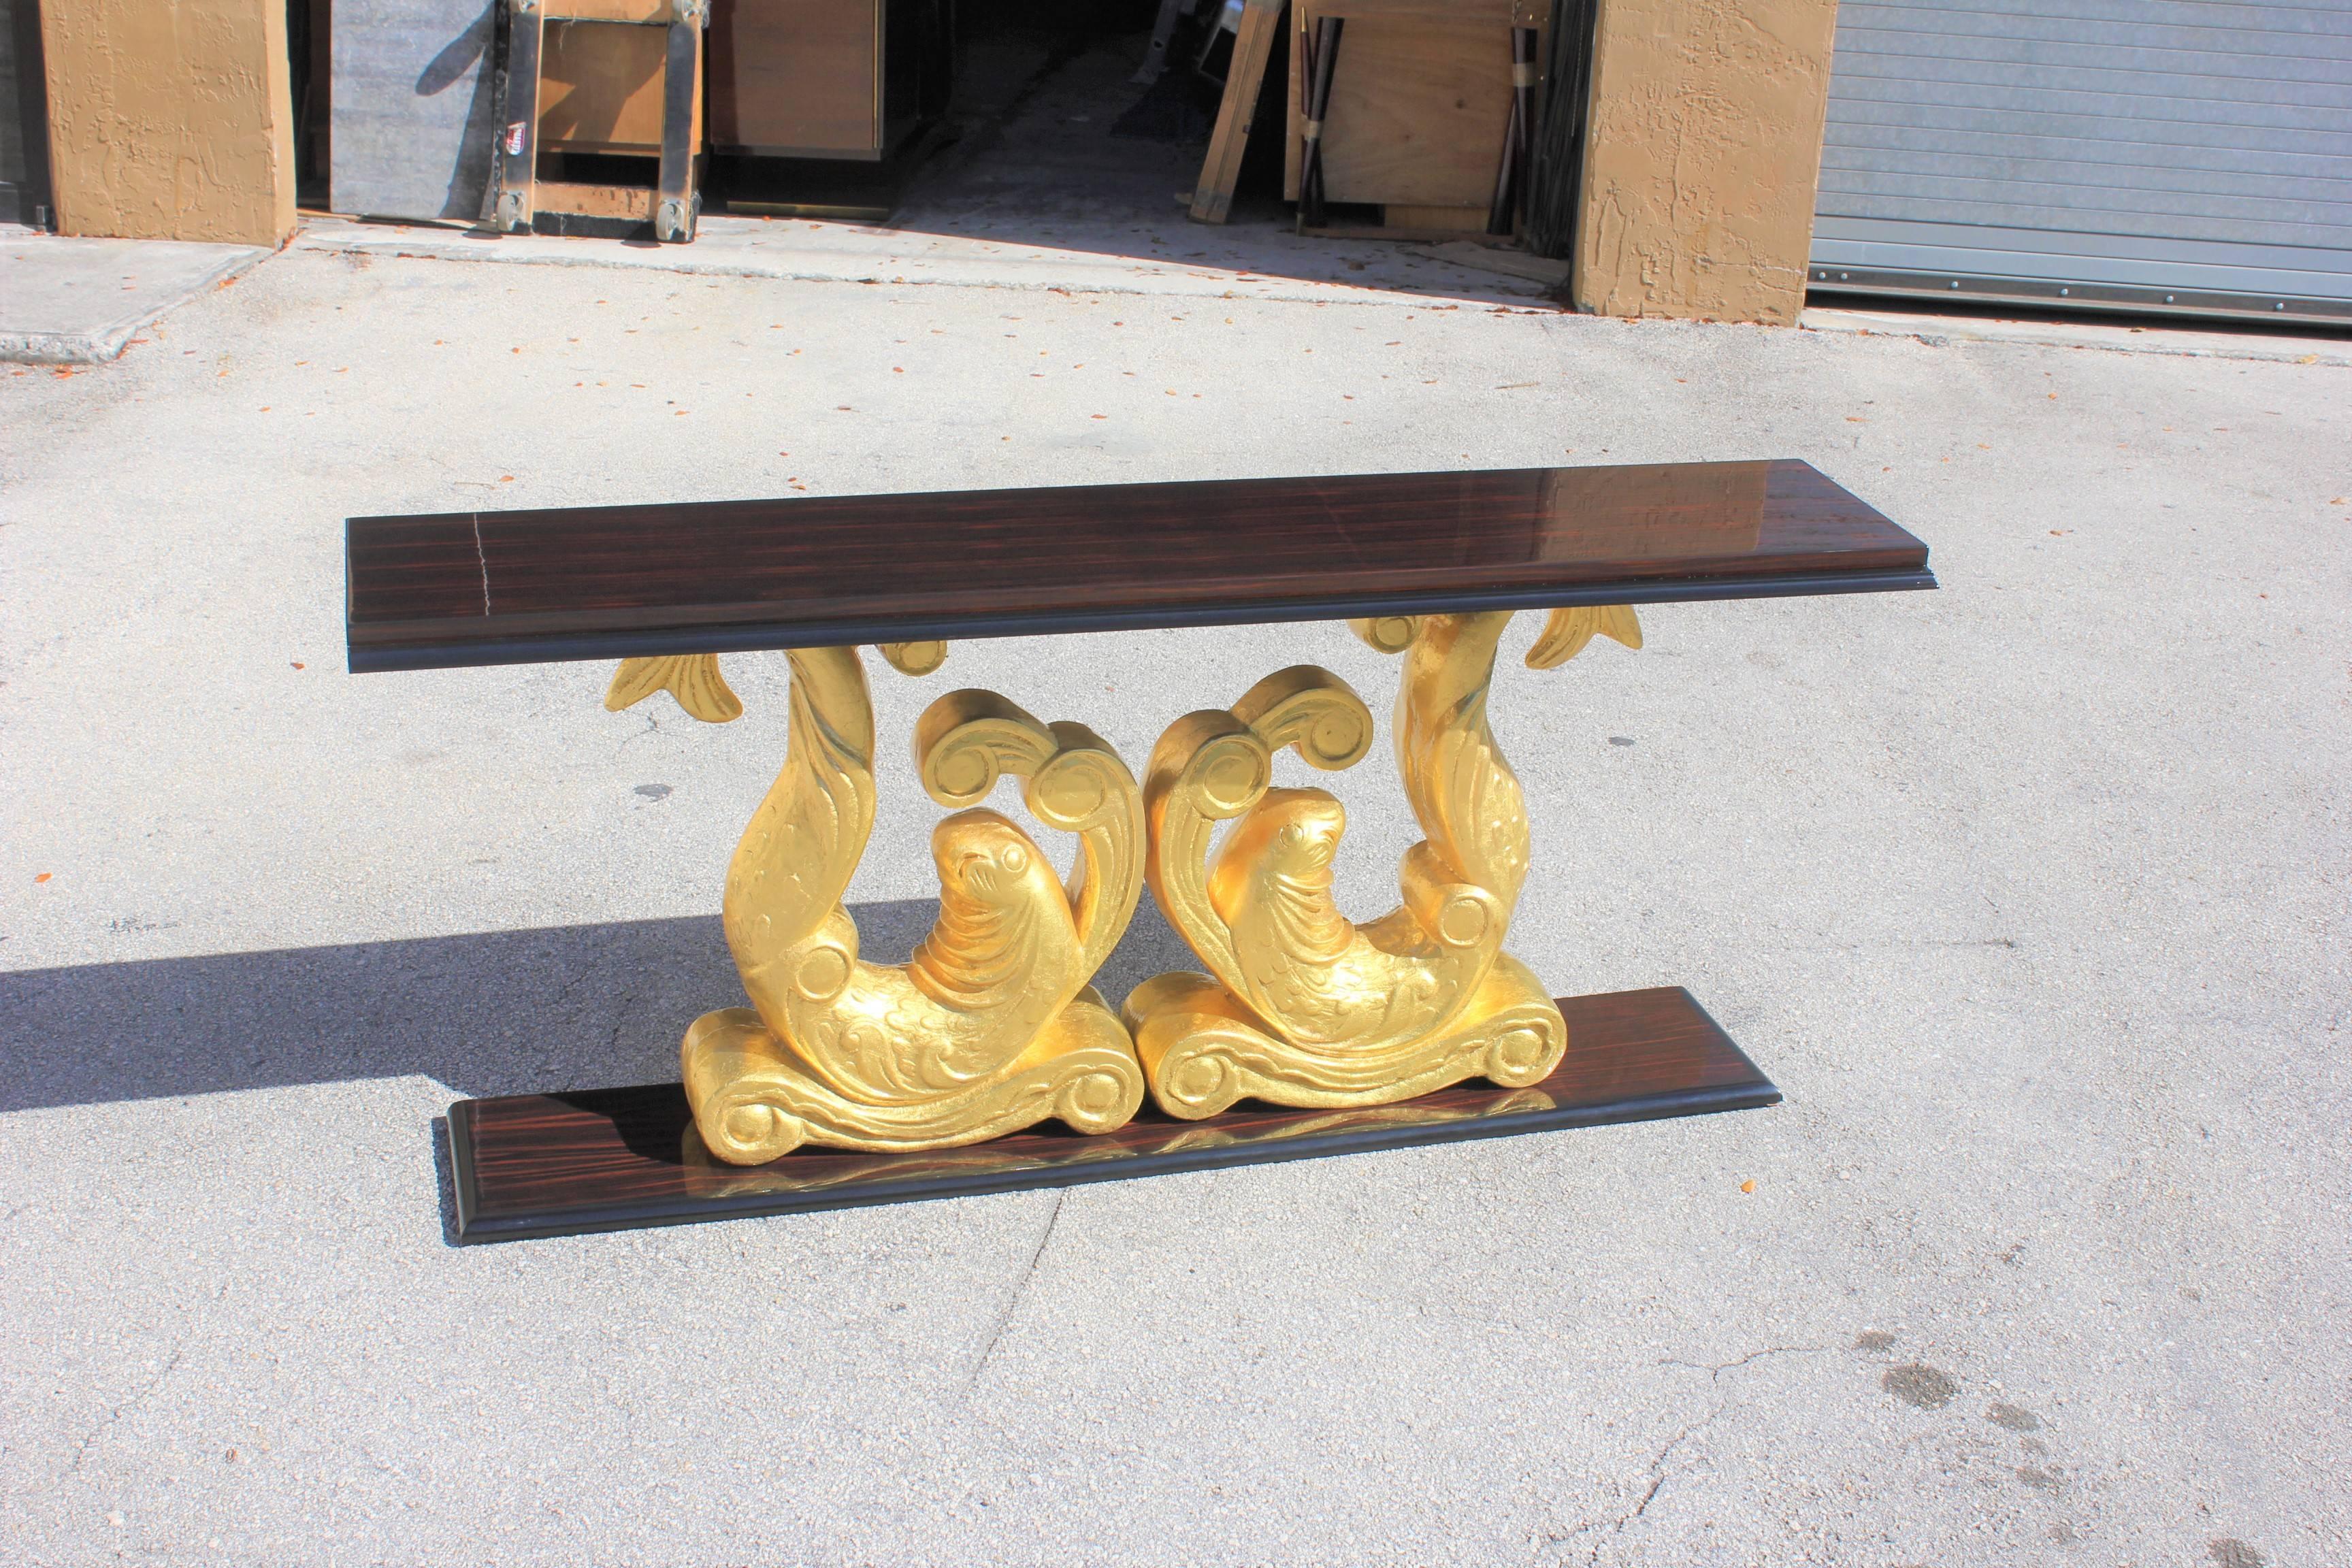 Unique long French Art Deco exotic Macassar ebony carved giltwood twin dolphin console table. Carved giltwood, original By Etienne Kohlmann. From France Monaco, circa 1930.